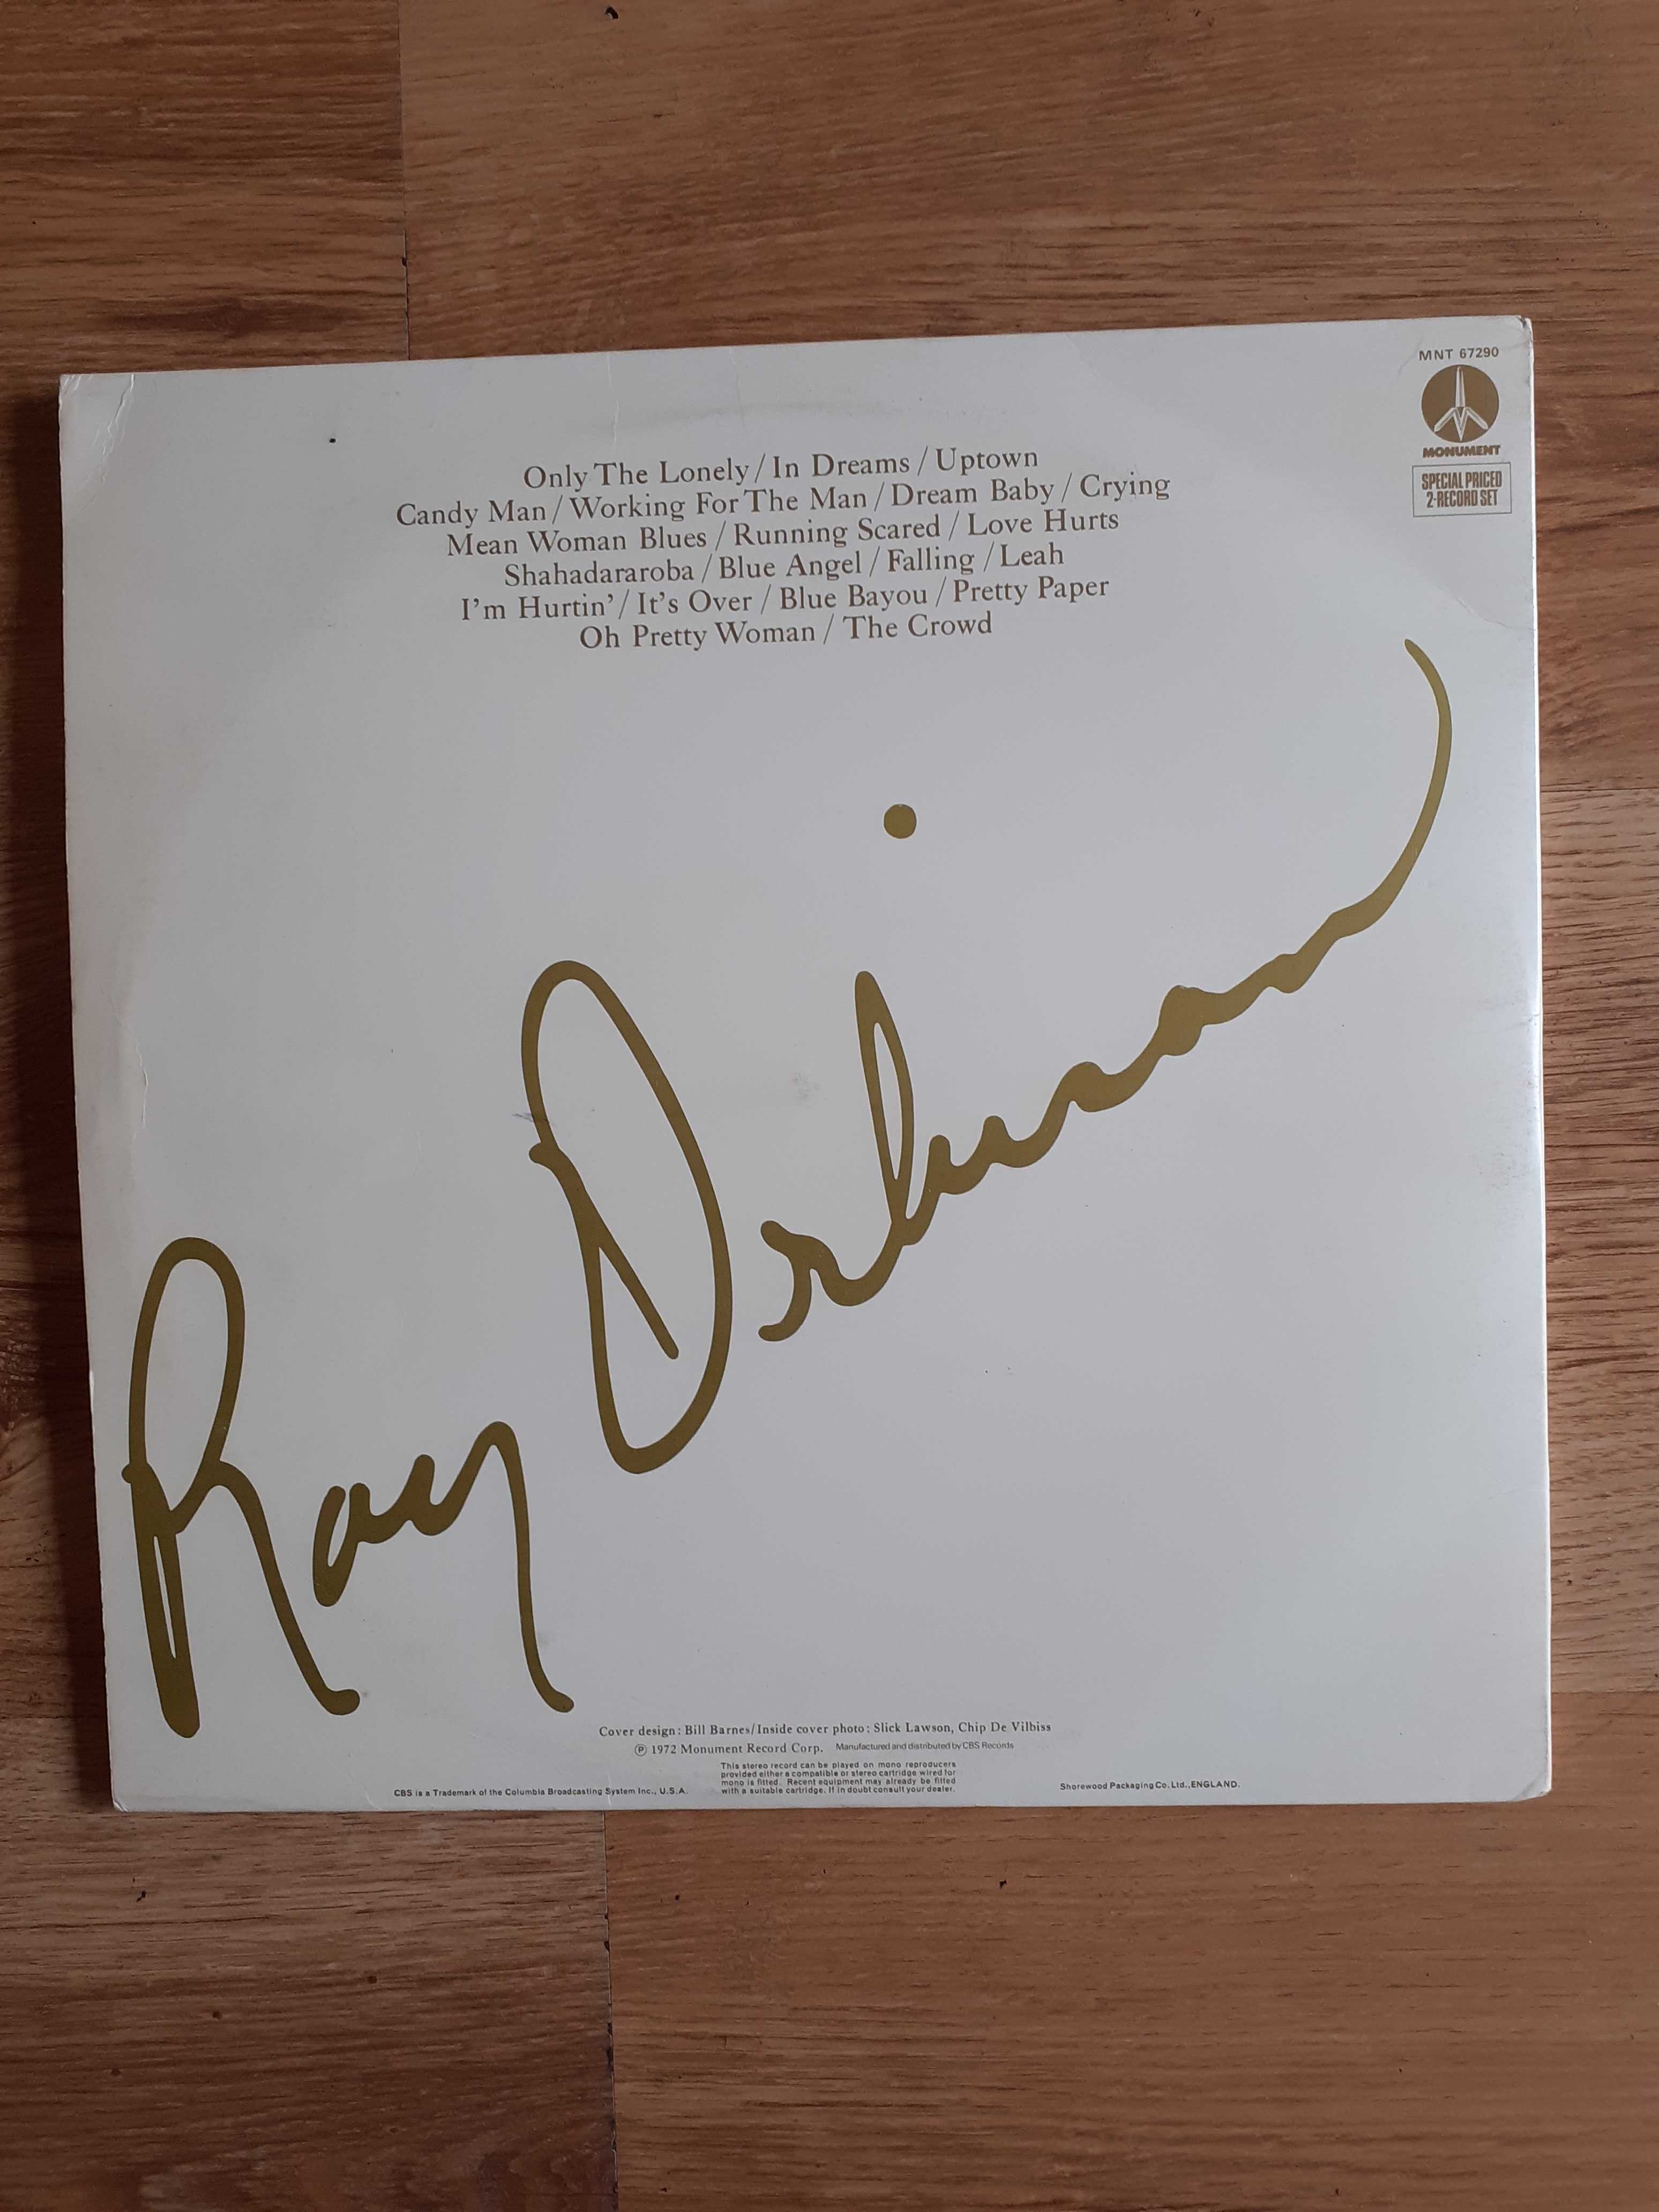 Roy Orbison The All-Time Greatest Hits of 2 lp